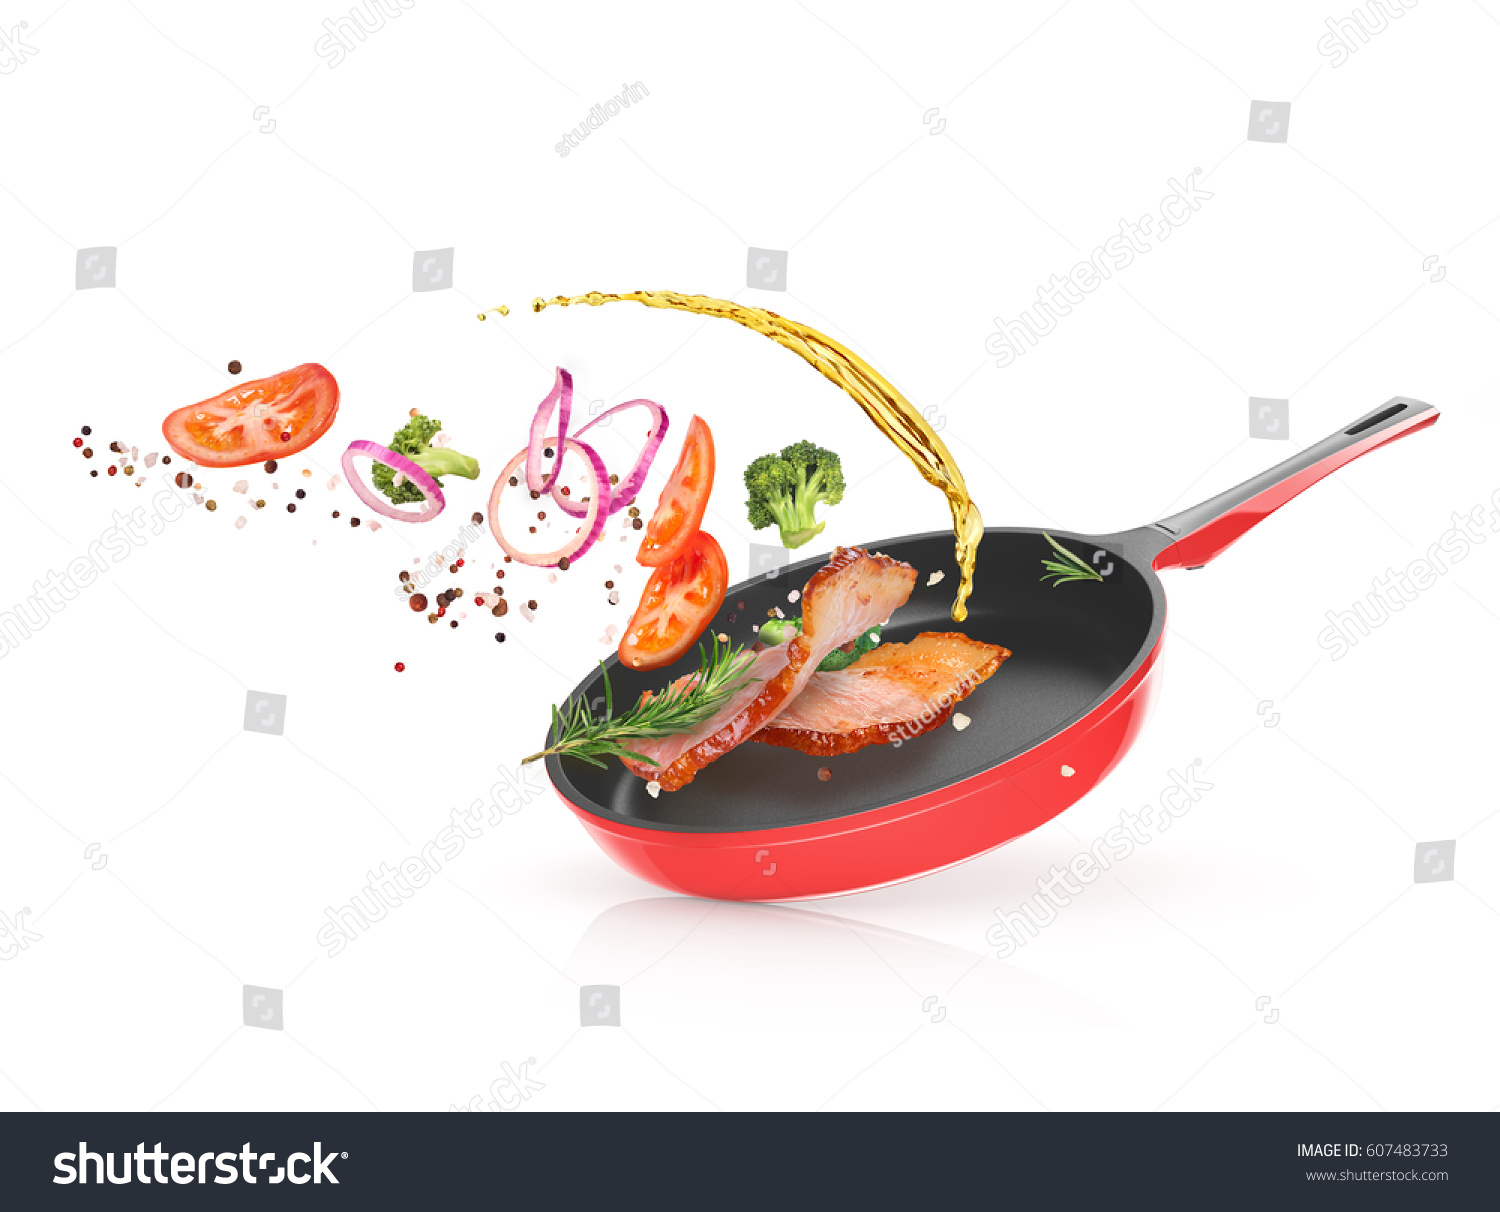 Meat with vegetables in a frying pan #607483733